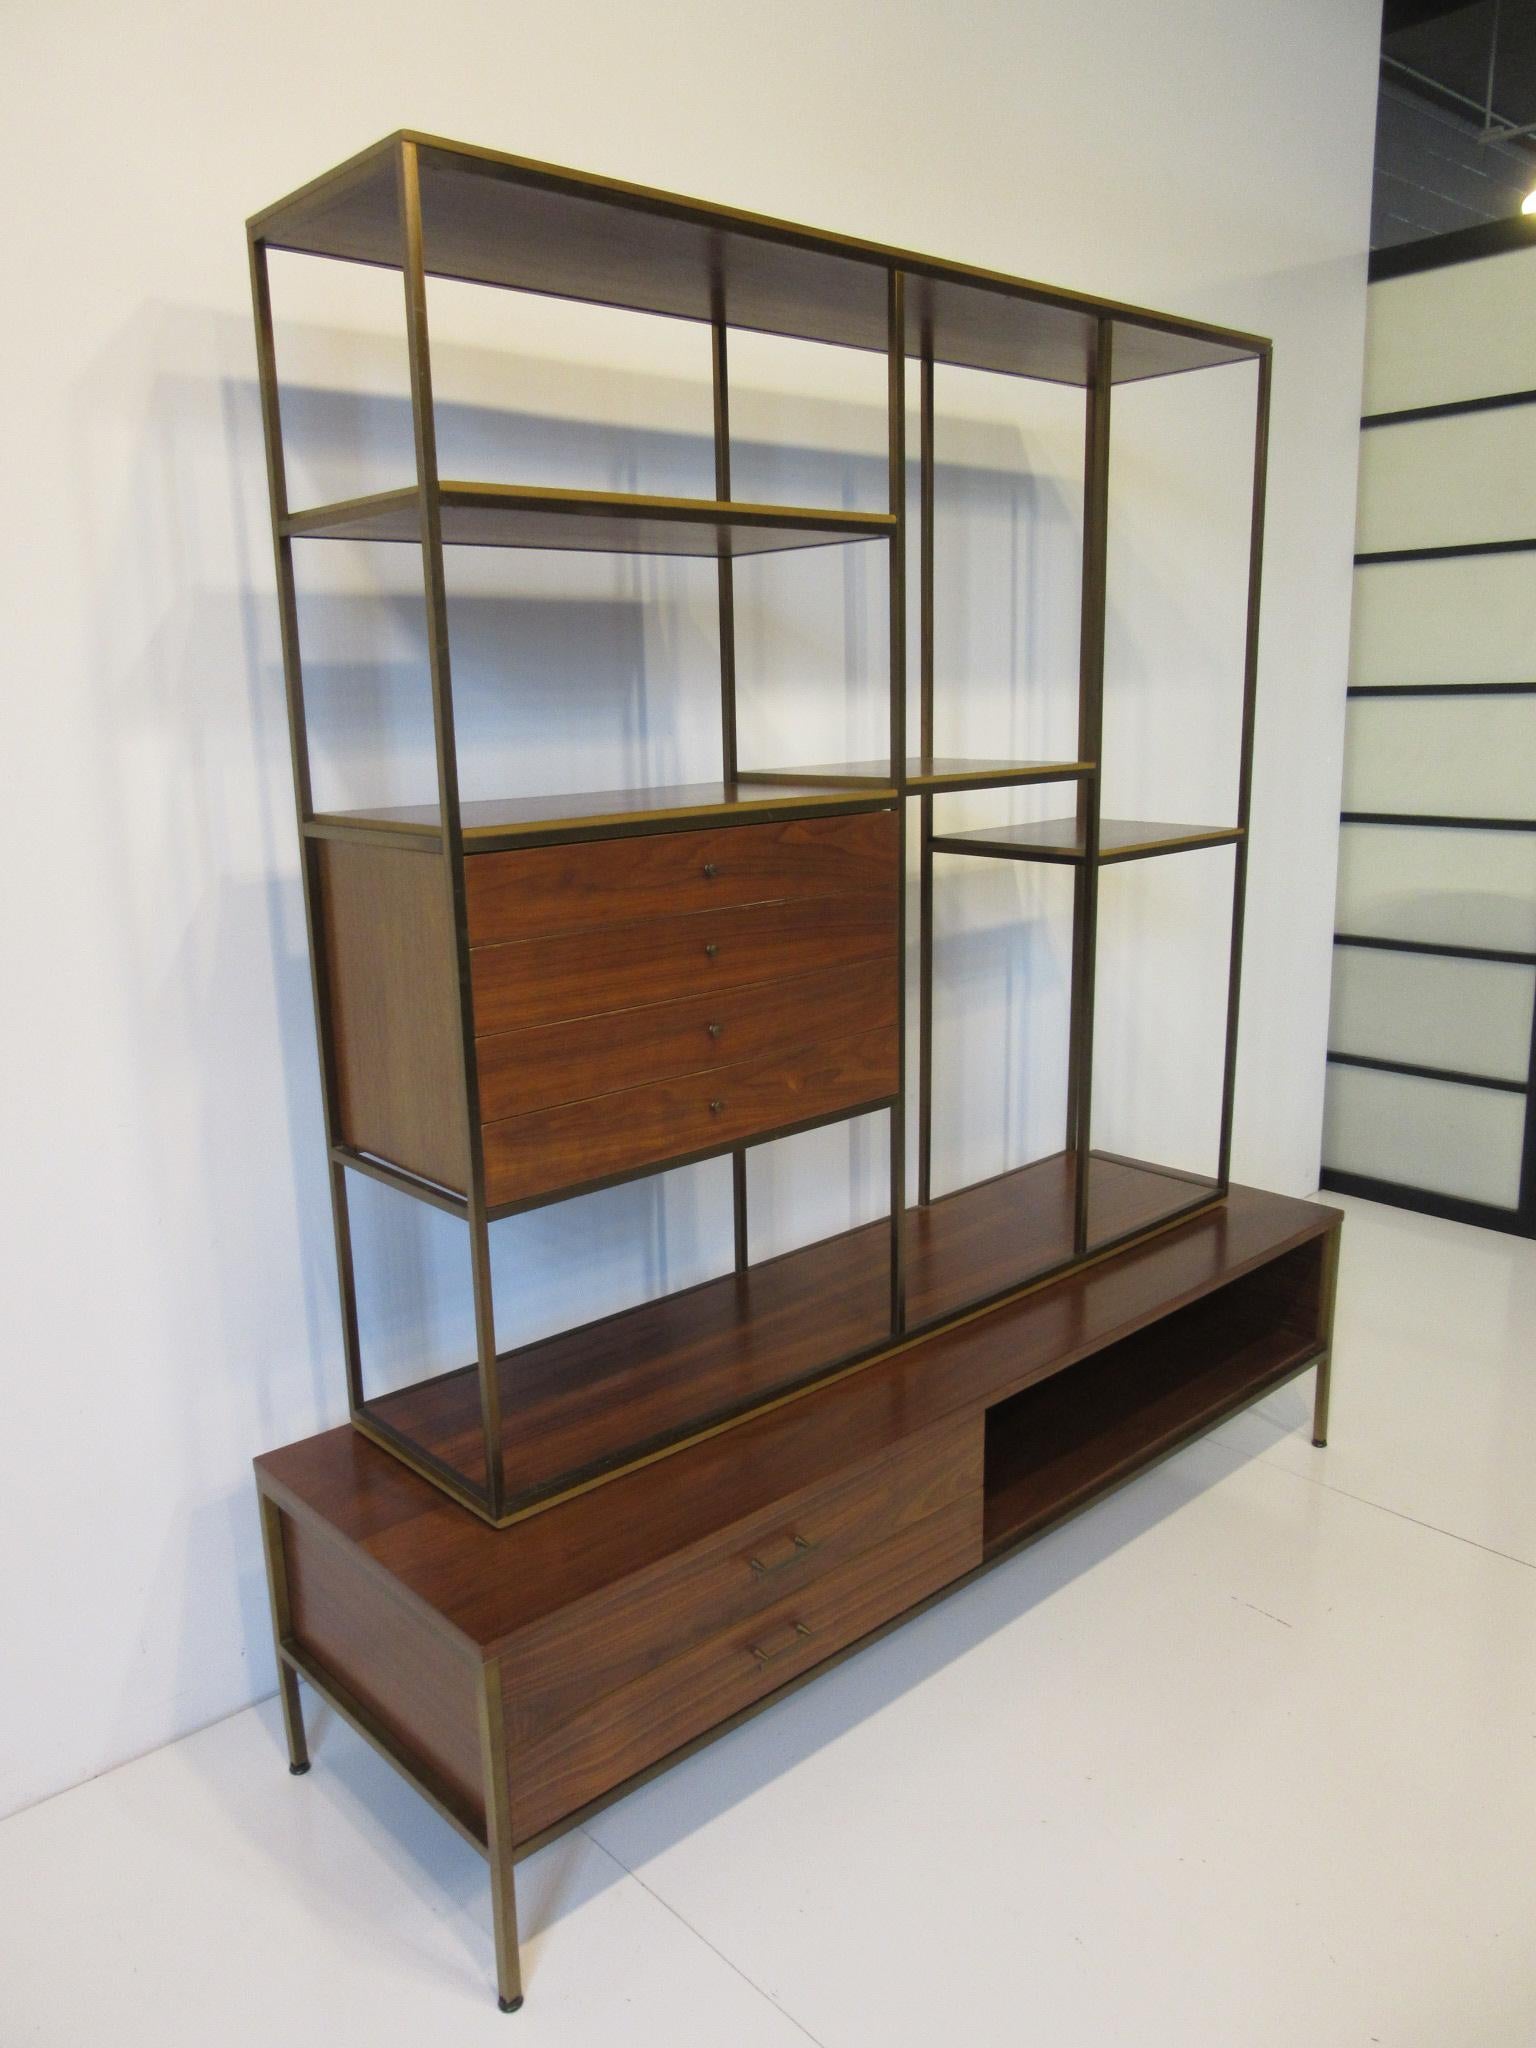 A well crafted two-piece brass frame and dark walnut bookcase / room divider with fixed shelves and four upper drawers with pulls . The lower base has a brass frame and two longer drawers with handles and a storage area to the other side . The piece